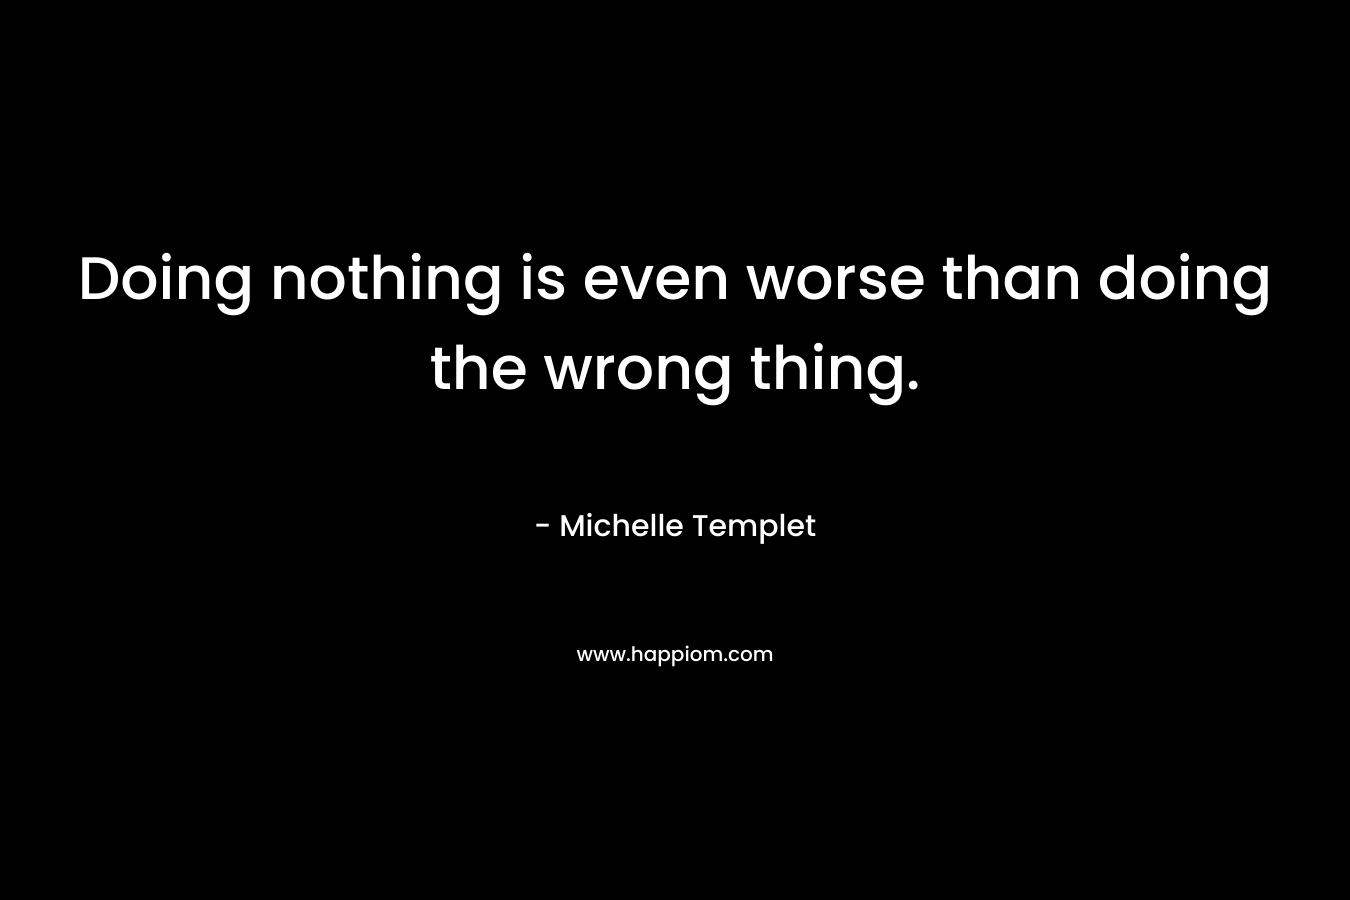 Doing nothing is even worse than doing the wrong thing.